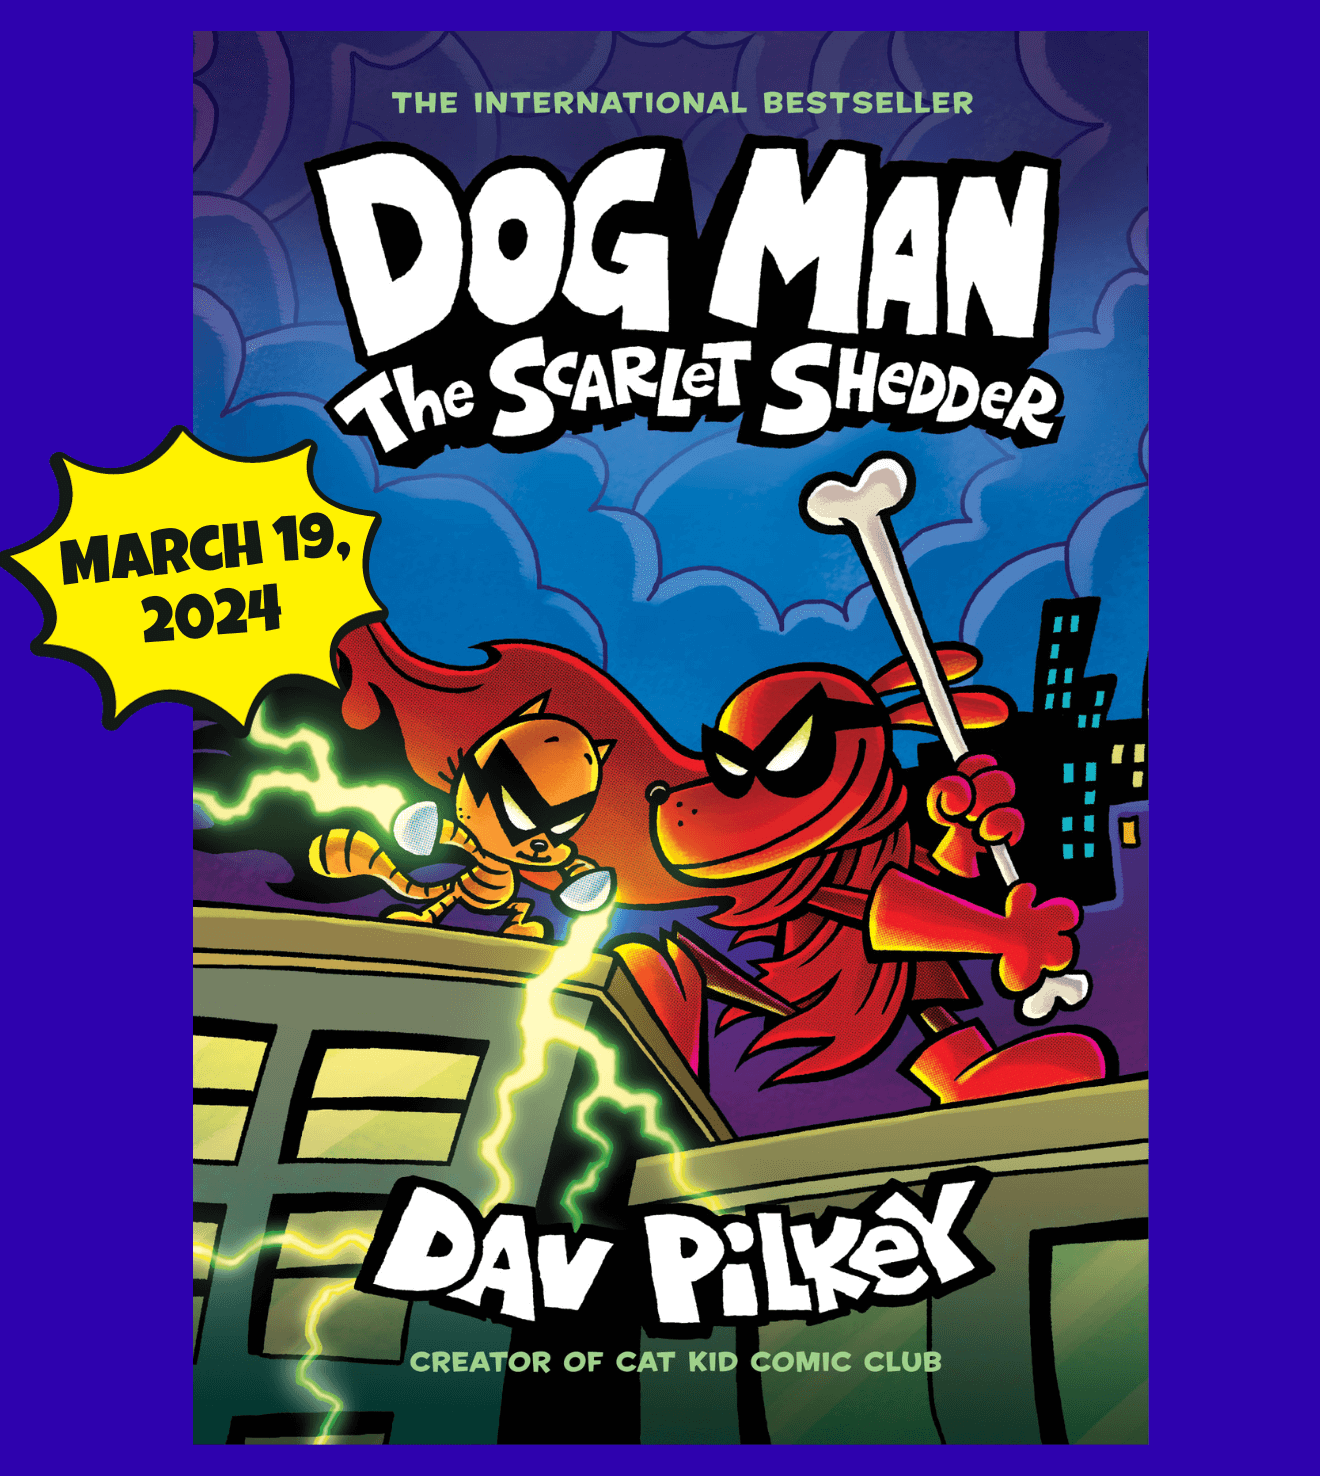 Dog Man The Scarlet Shedder by Dan Pilkey coming March 19, 2024